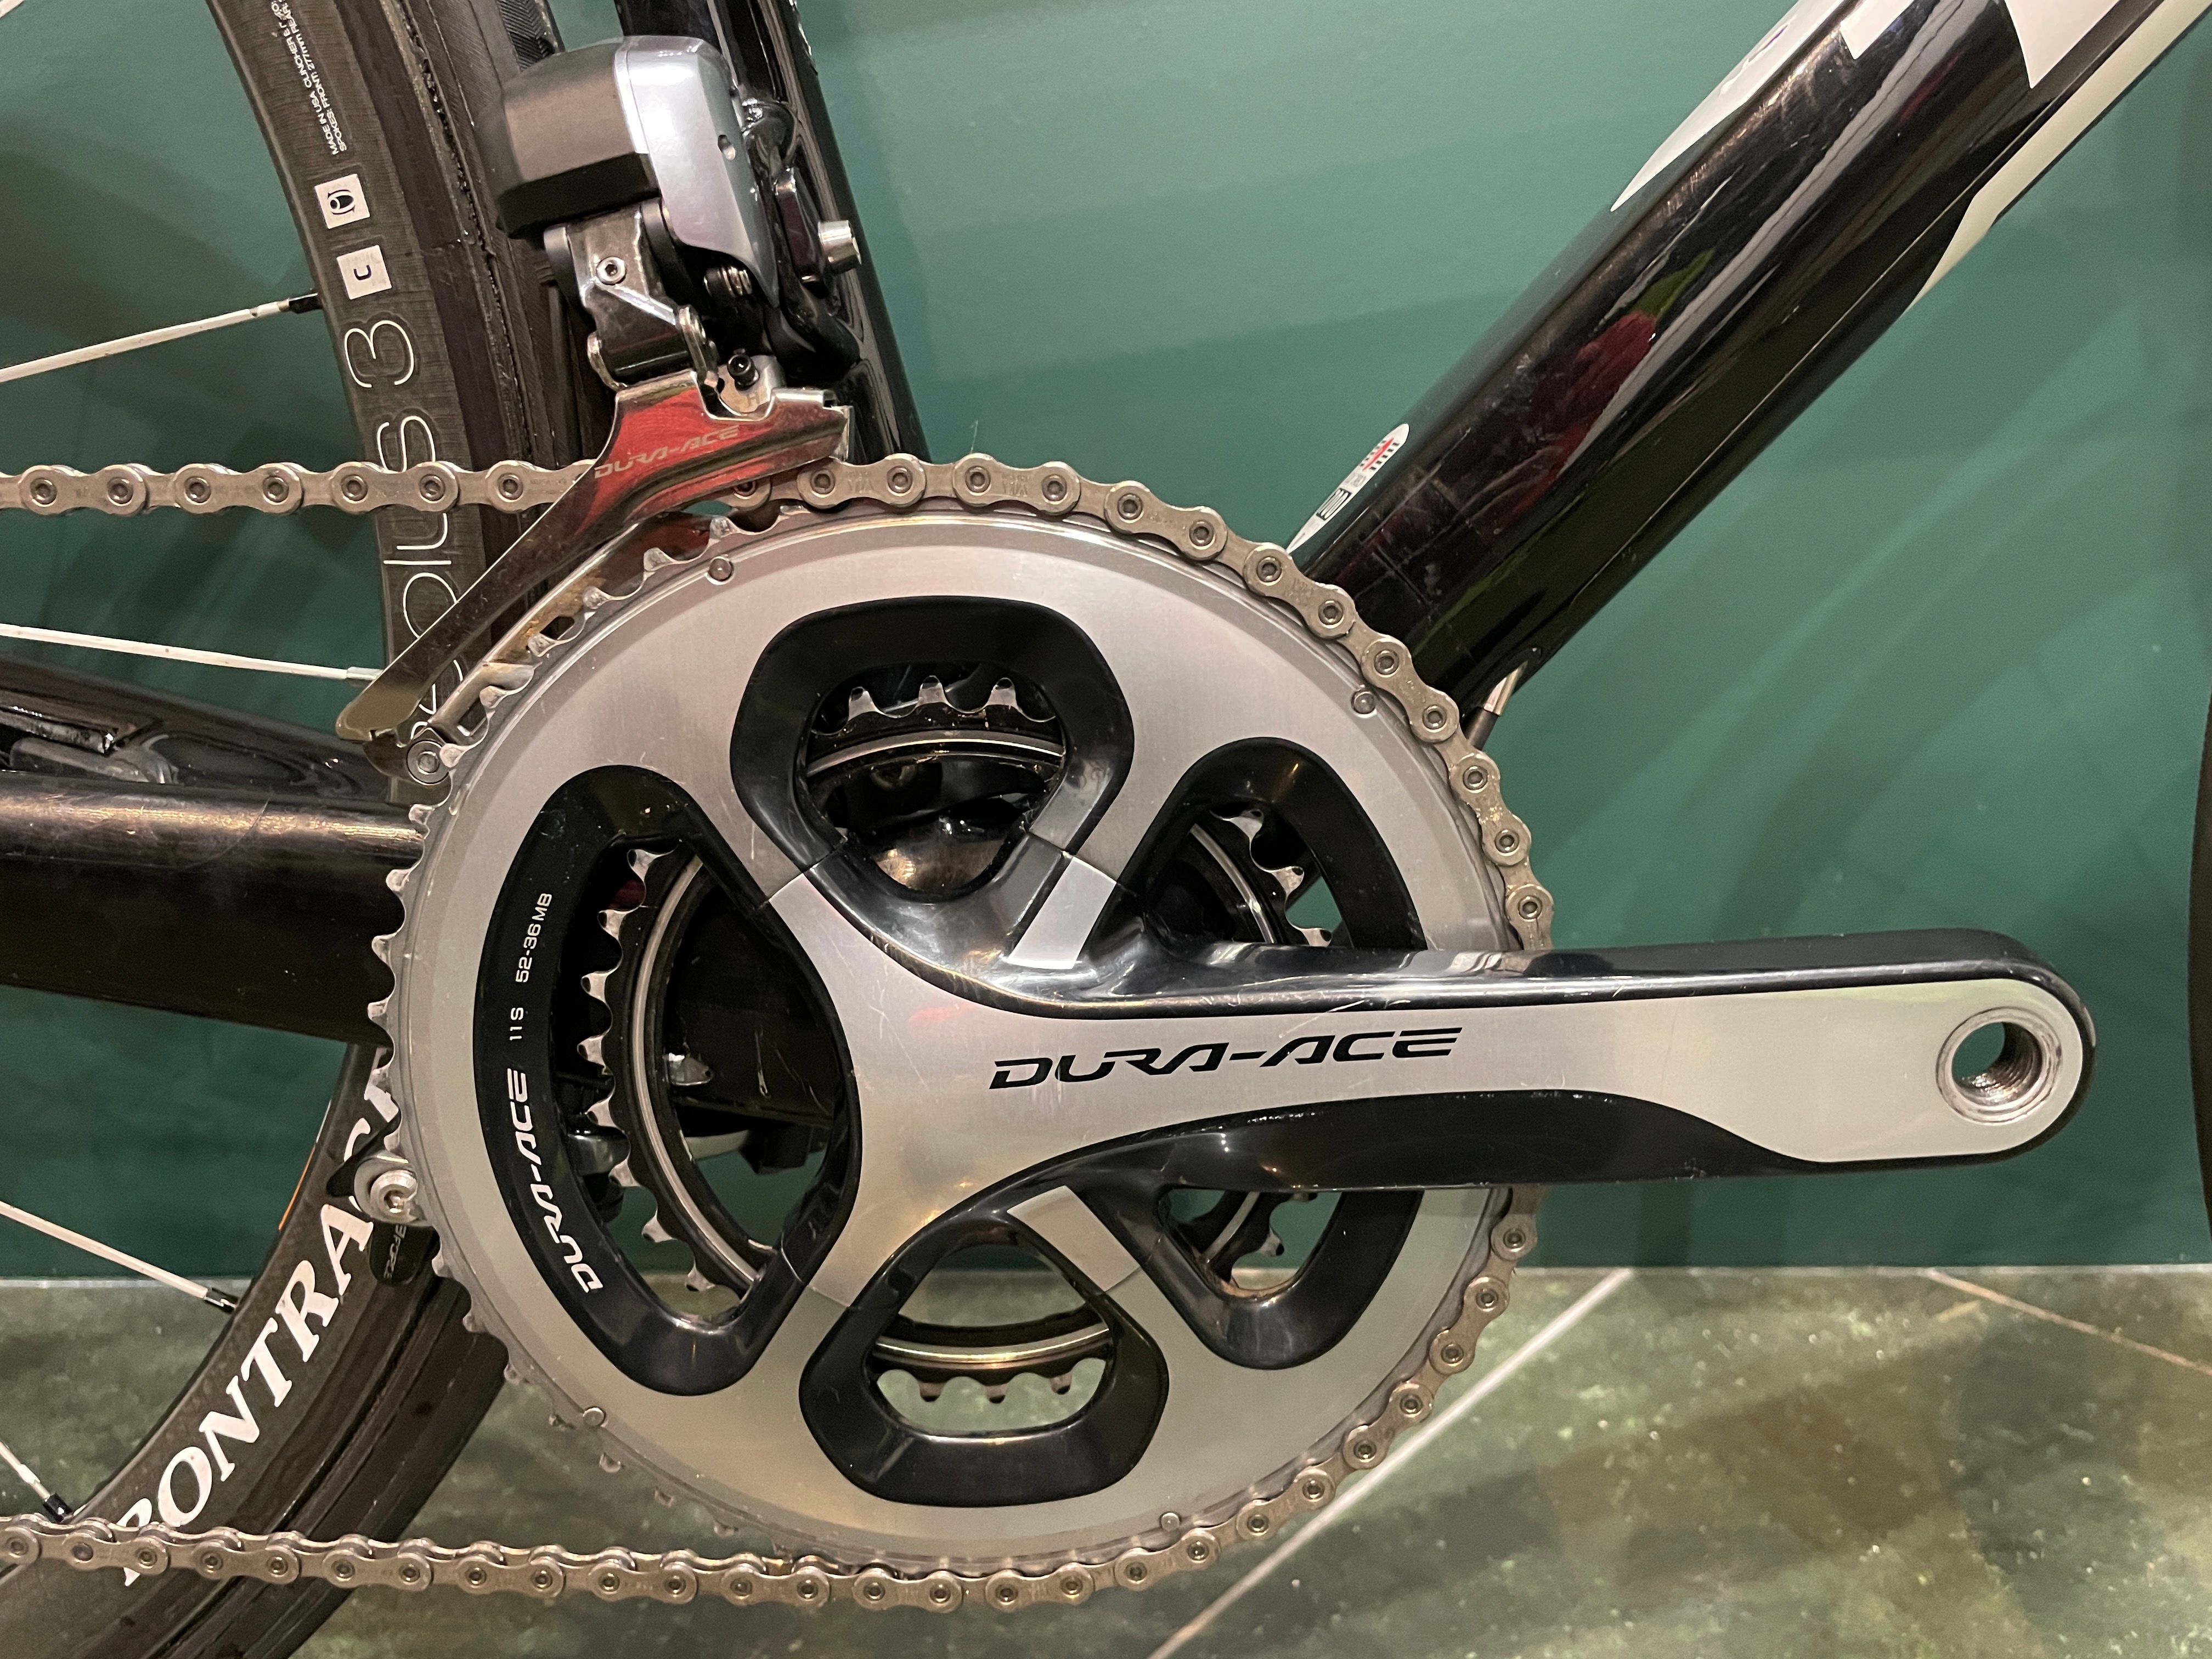 Trek Madone 7 Series Dura Ace Di2 used in M | buycycle USA